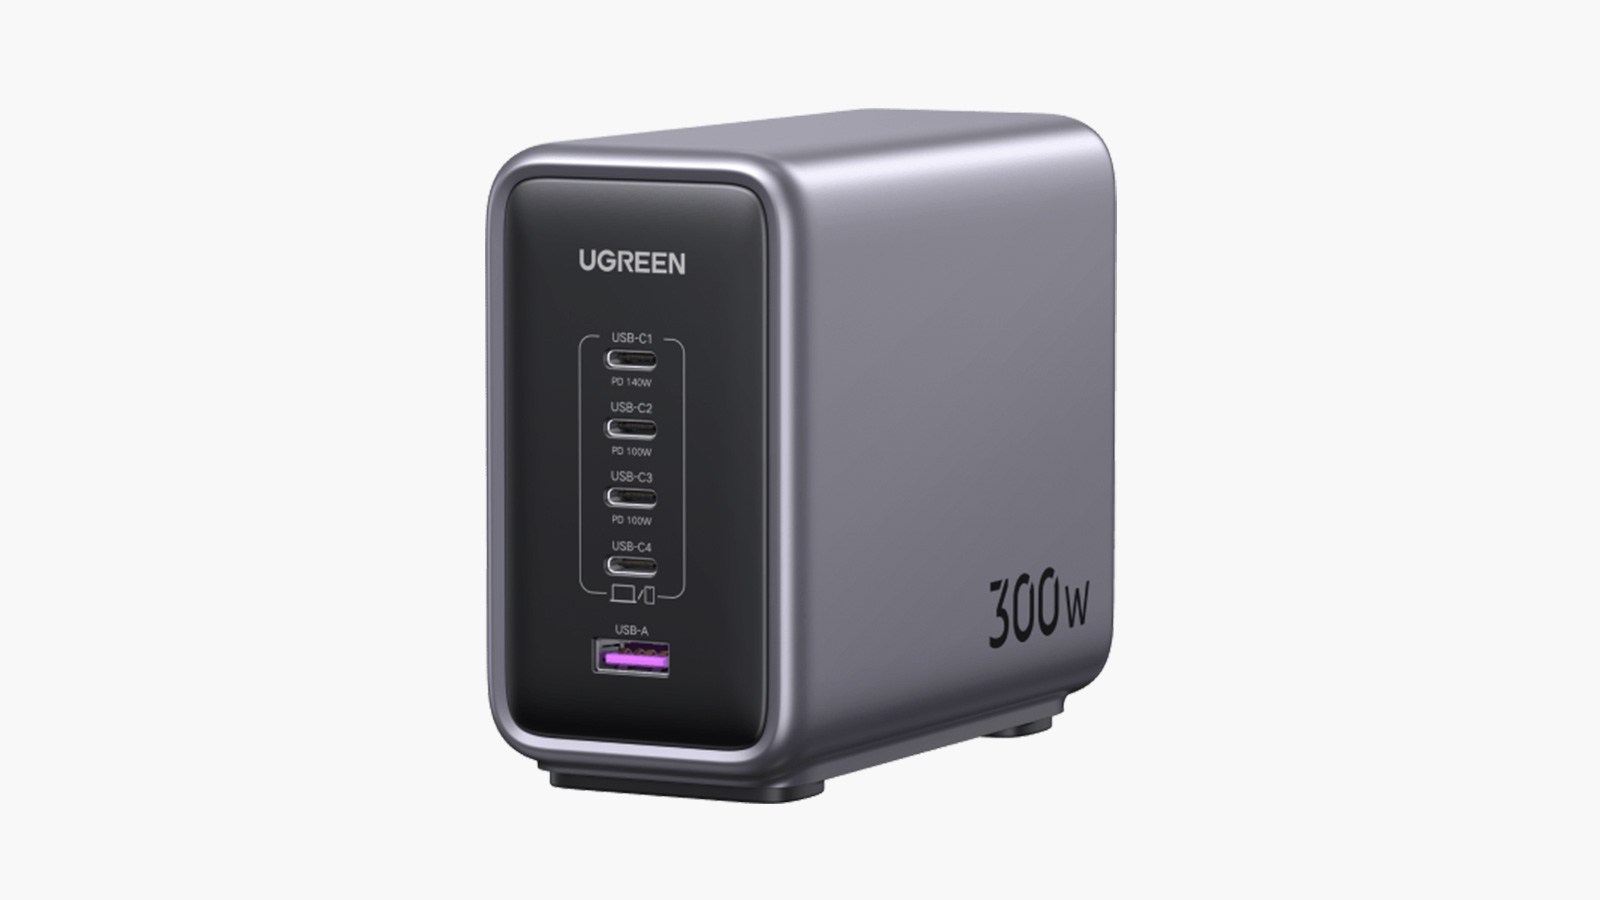 UGREEN Nexode 300W Is The Ultimate All-in-One Charger For Power